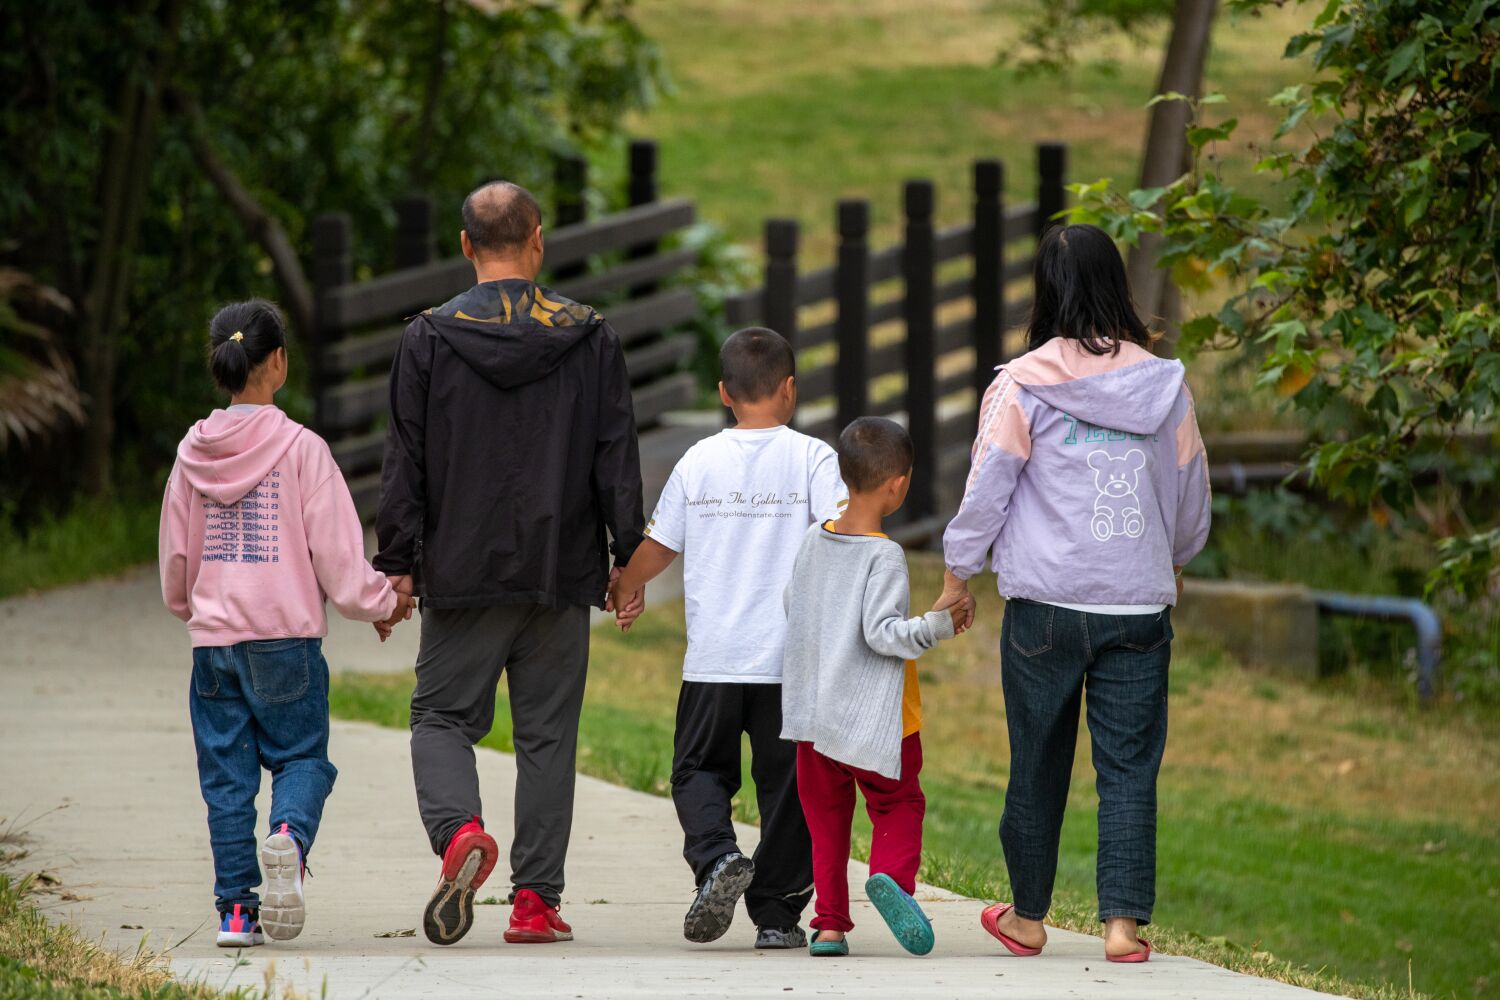 In an L.A. suburb, Chinese 'border crossers' seek a new life after harrowing journey